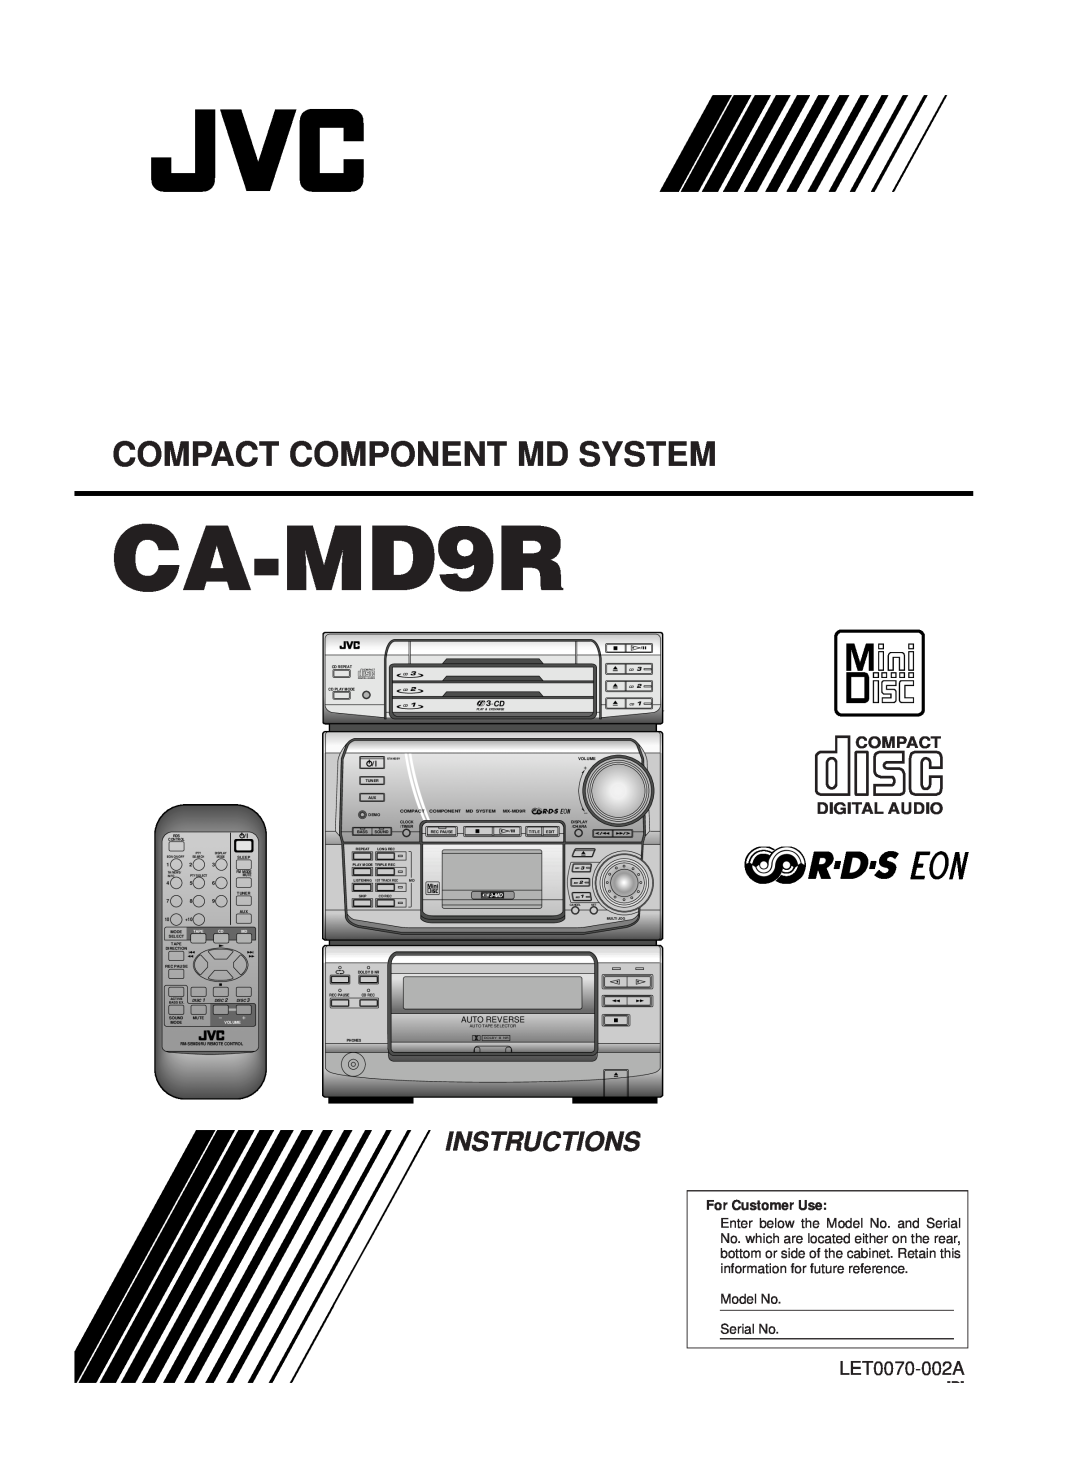 JVC LET0070-002A manual CA-MD9R, Compact Component Md System, Instructions, Compact Digital Audio, For Customer Use, 3 CD 